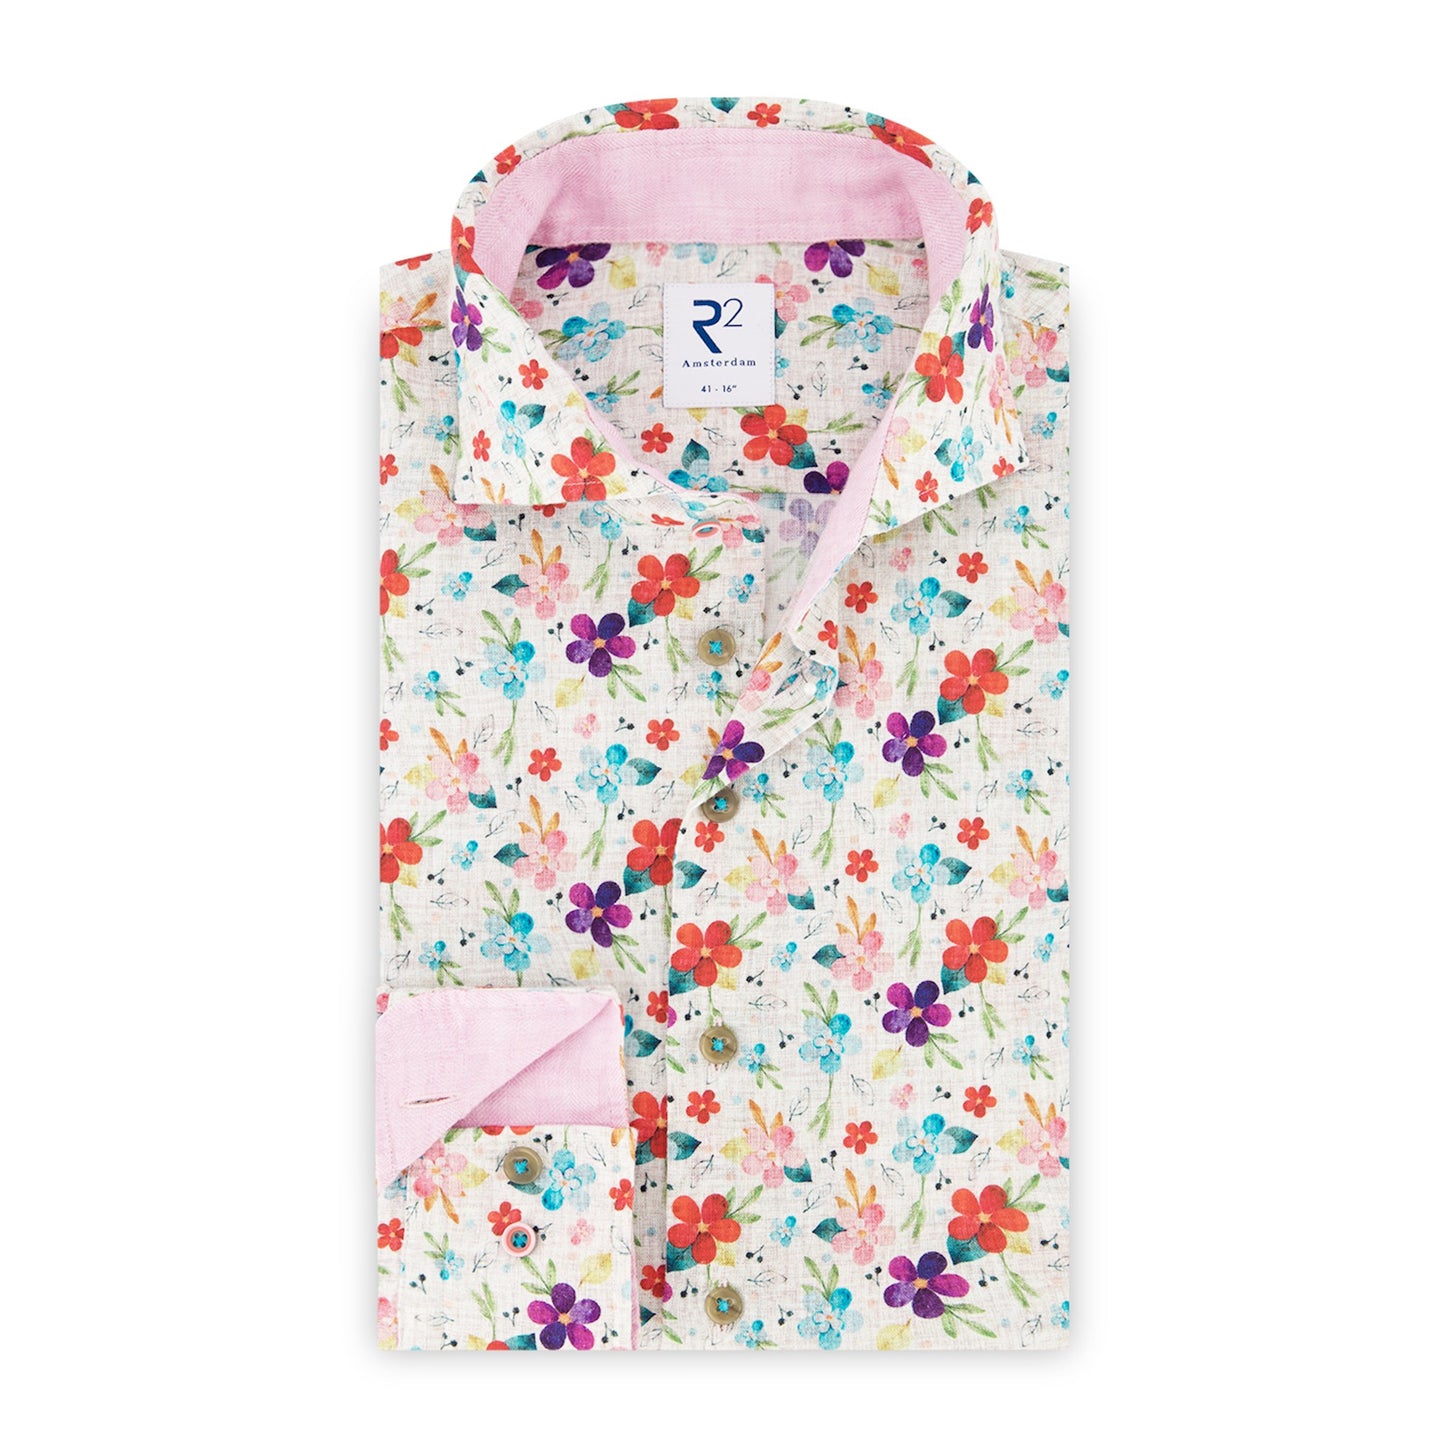 Linen mix in floral and pink by R2